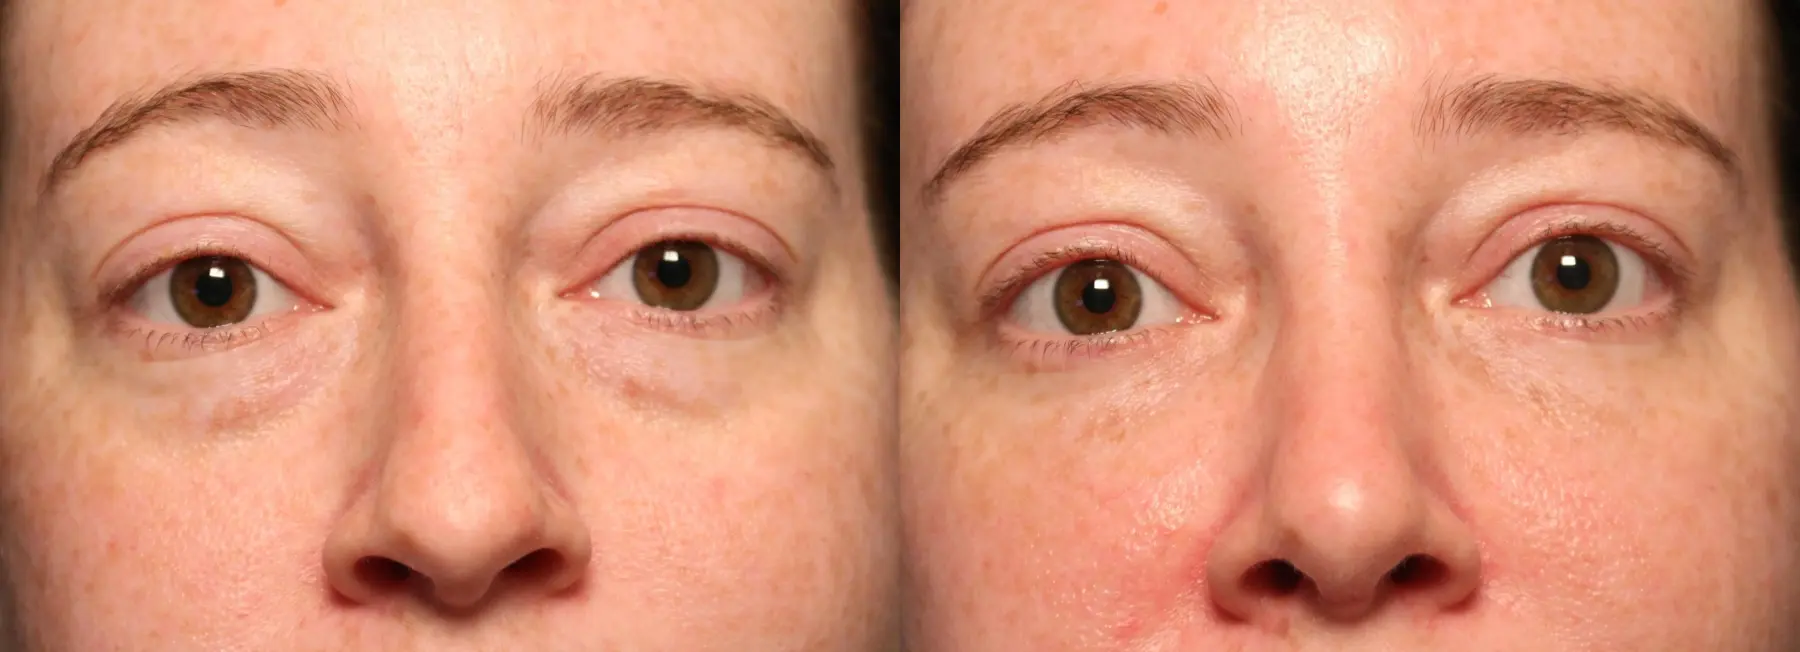 Eyelid Surgery: Patient 14 - Before and After  